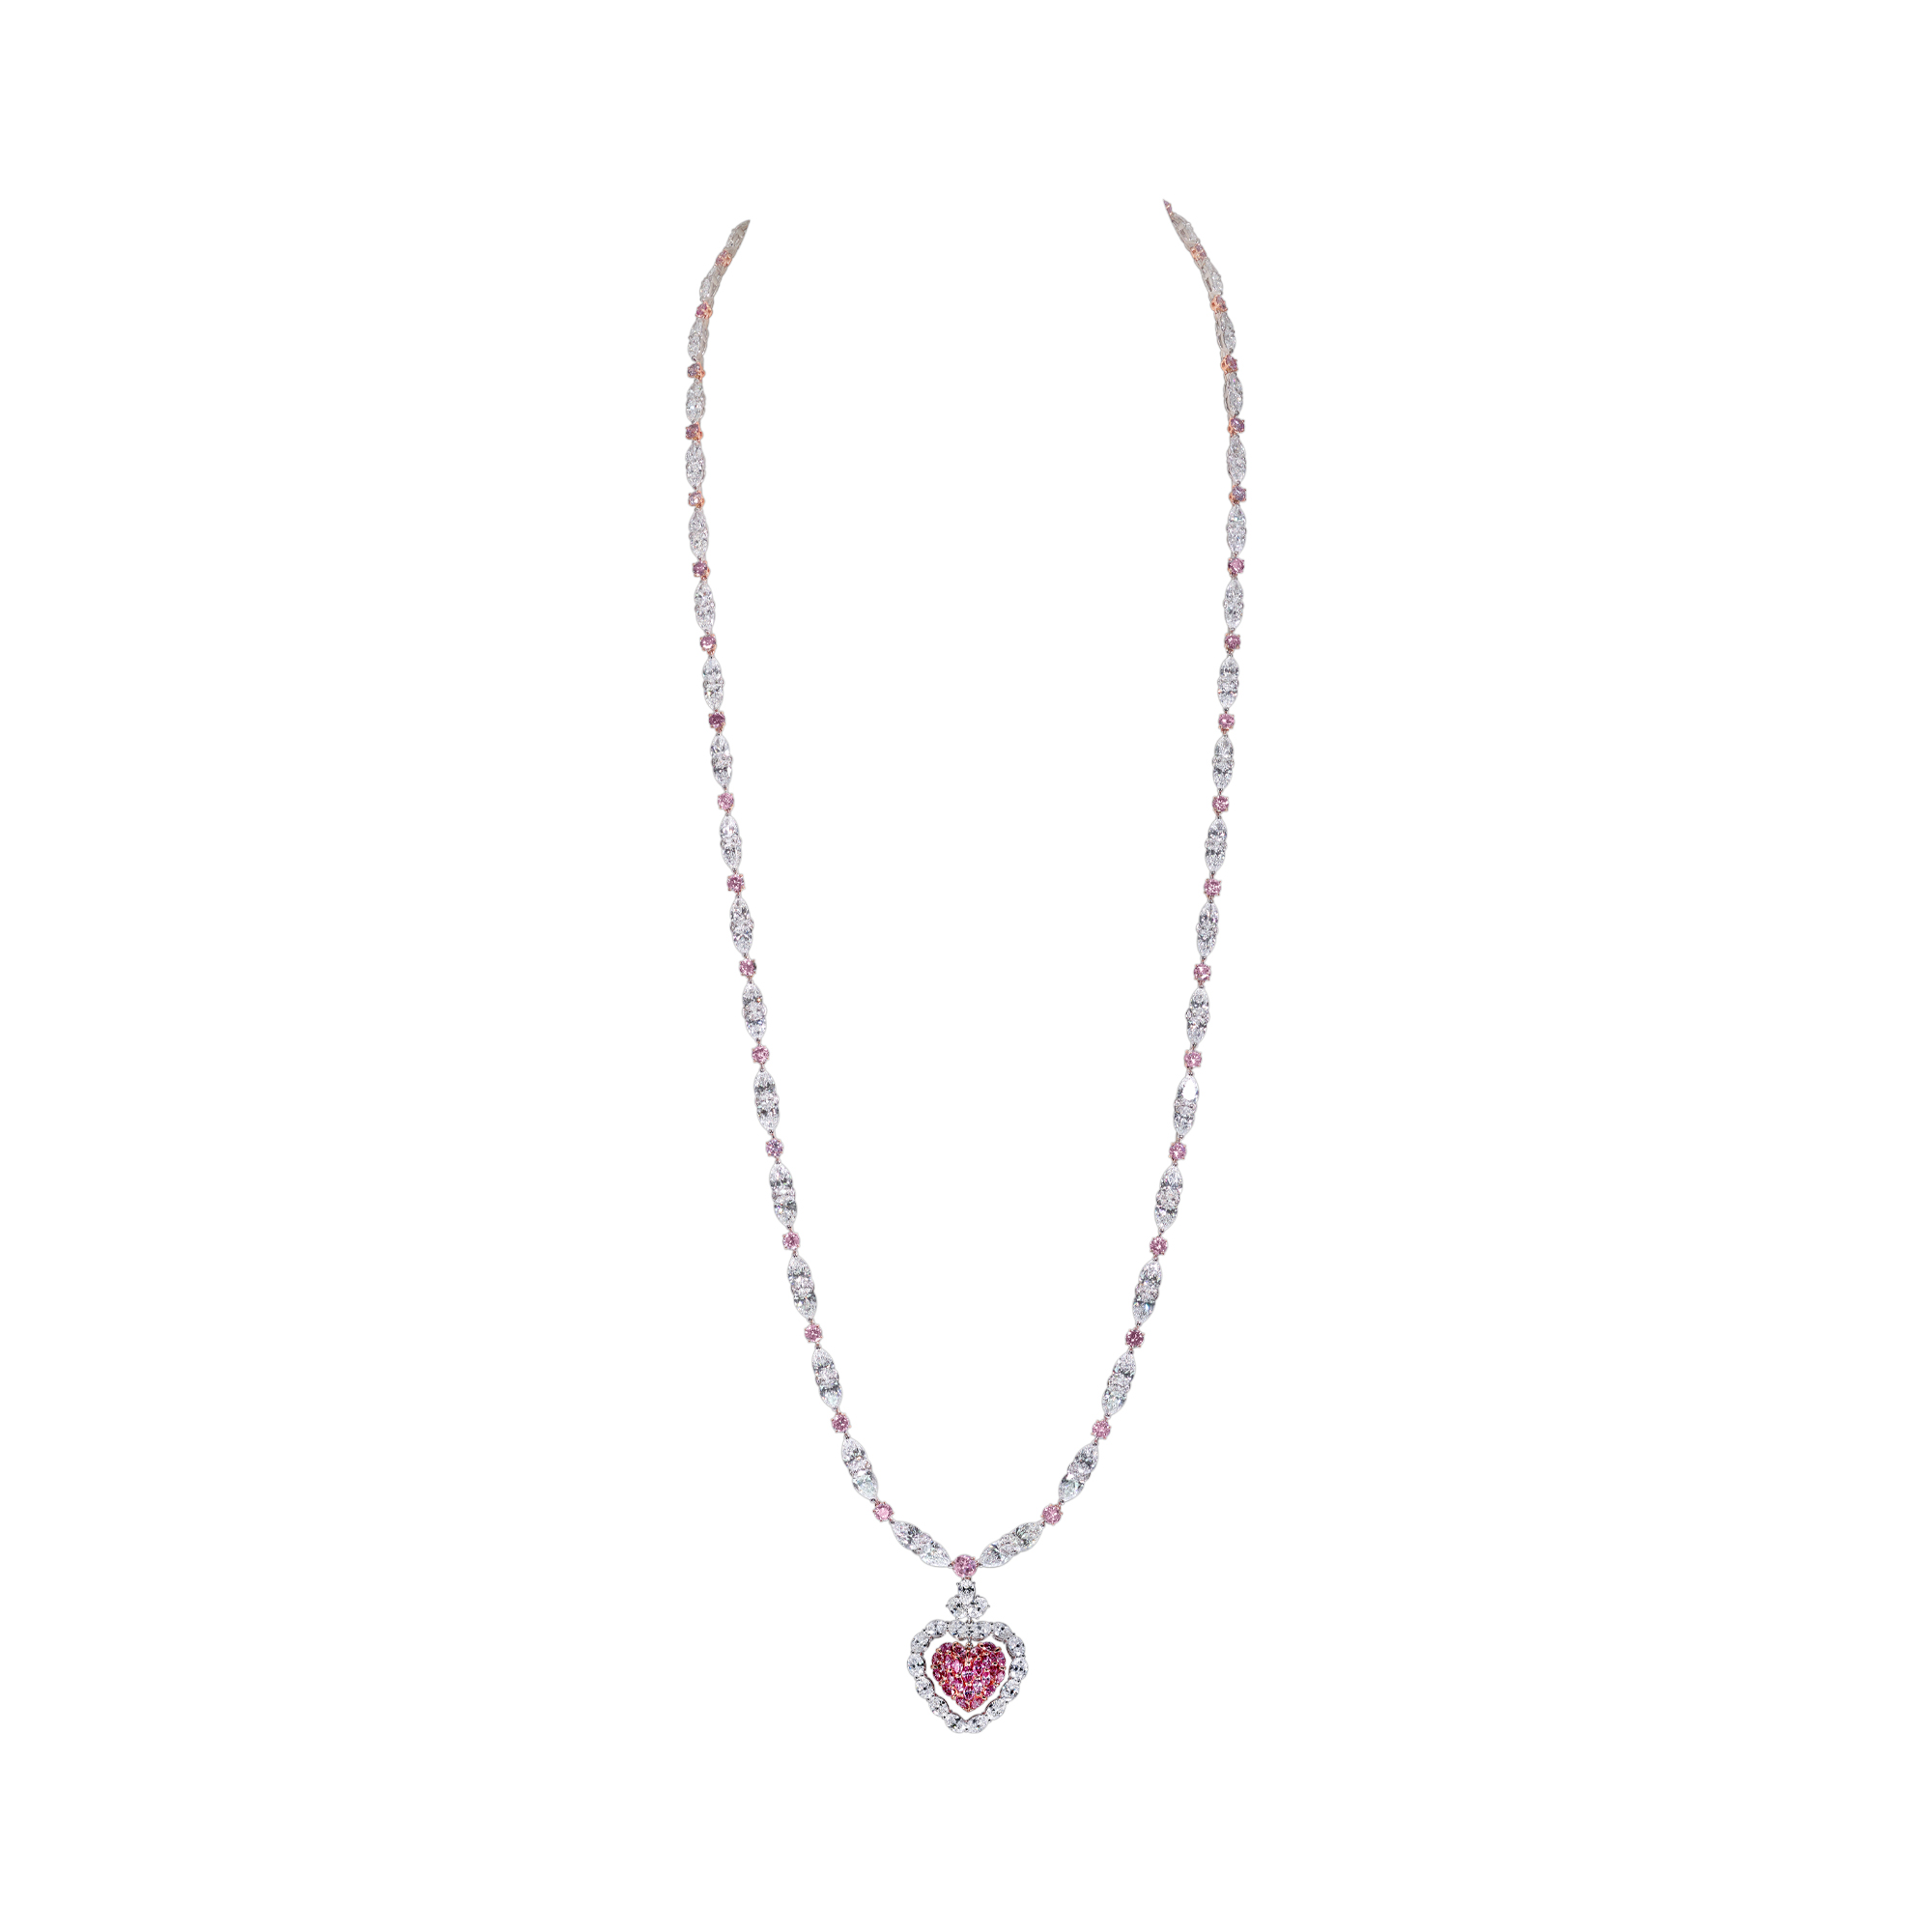 Pink, Blue and White Diamond Necklace - Moussaieff